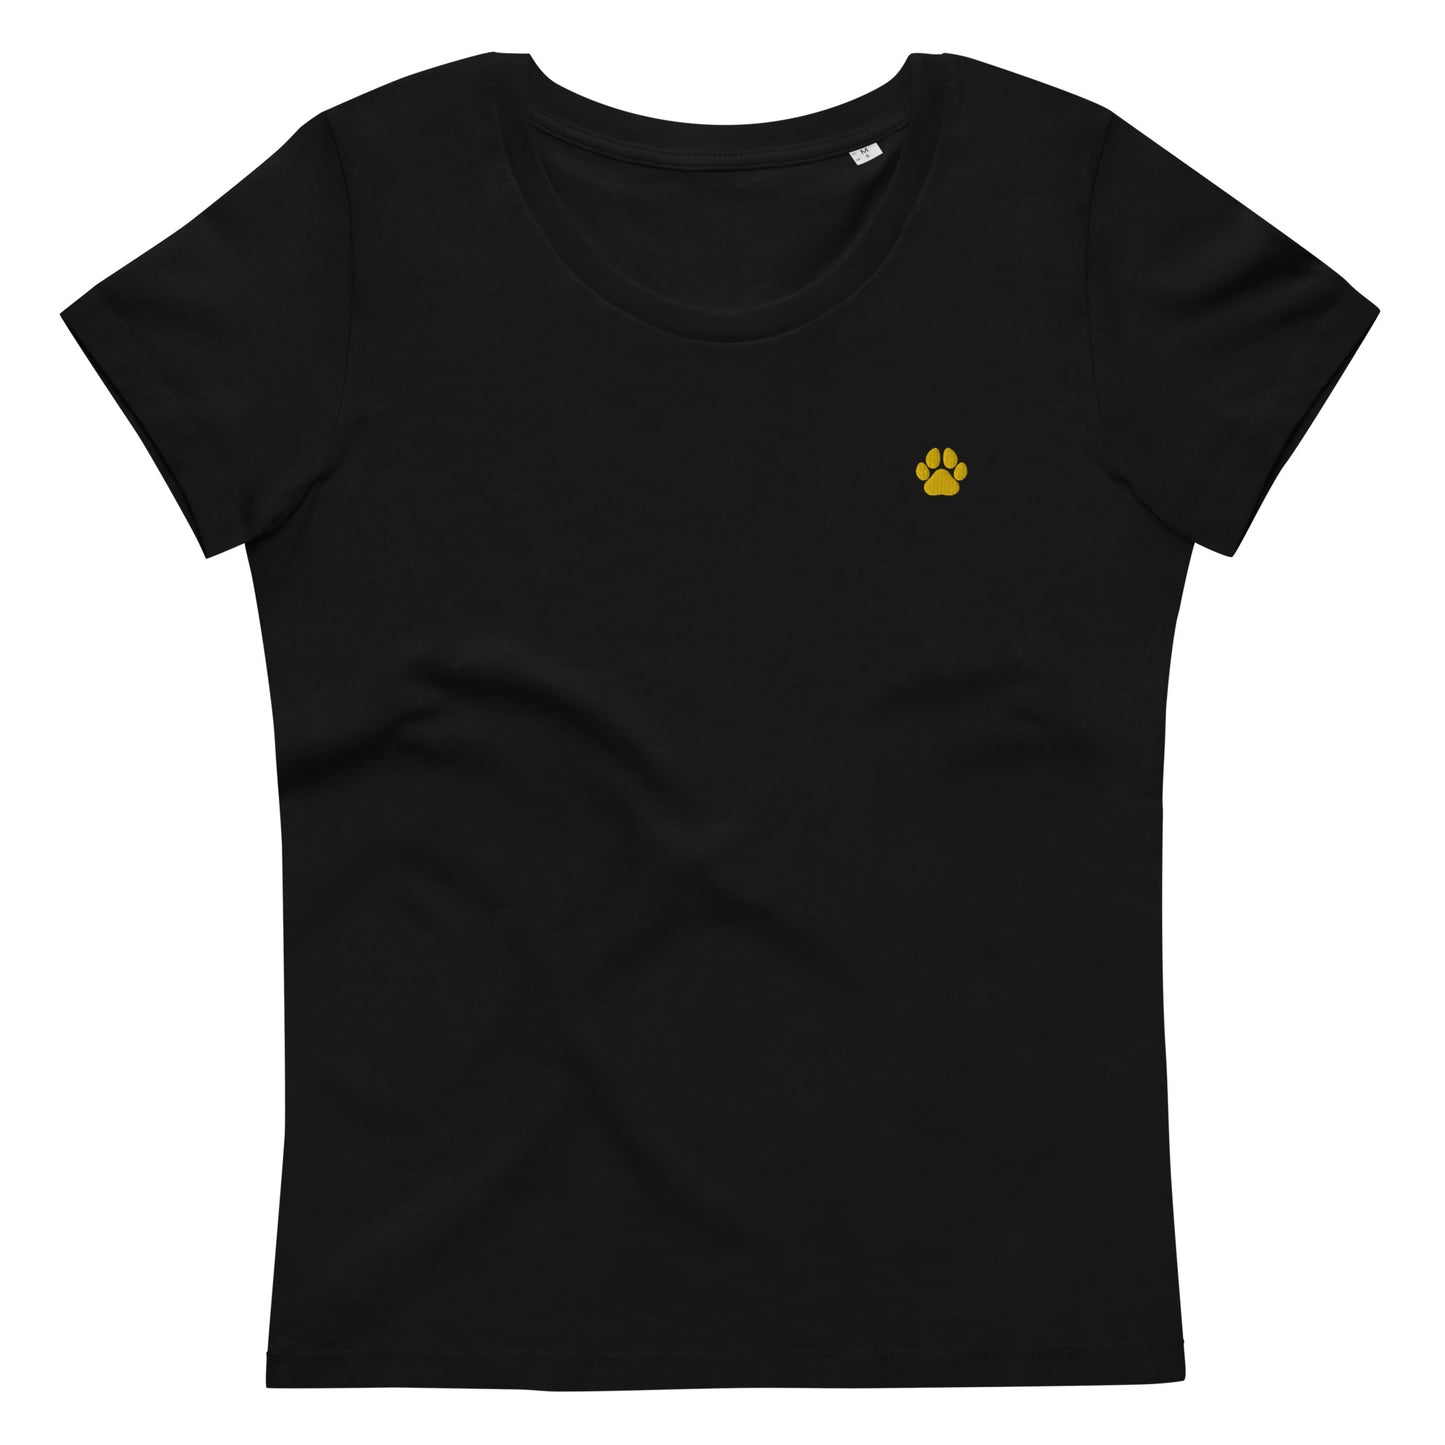 Dawgette's fitted eco tee